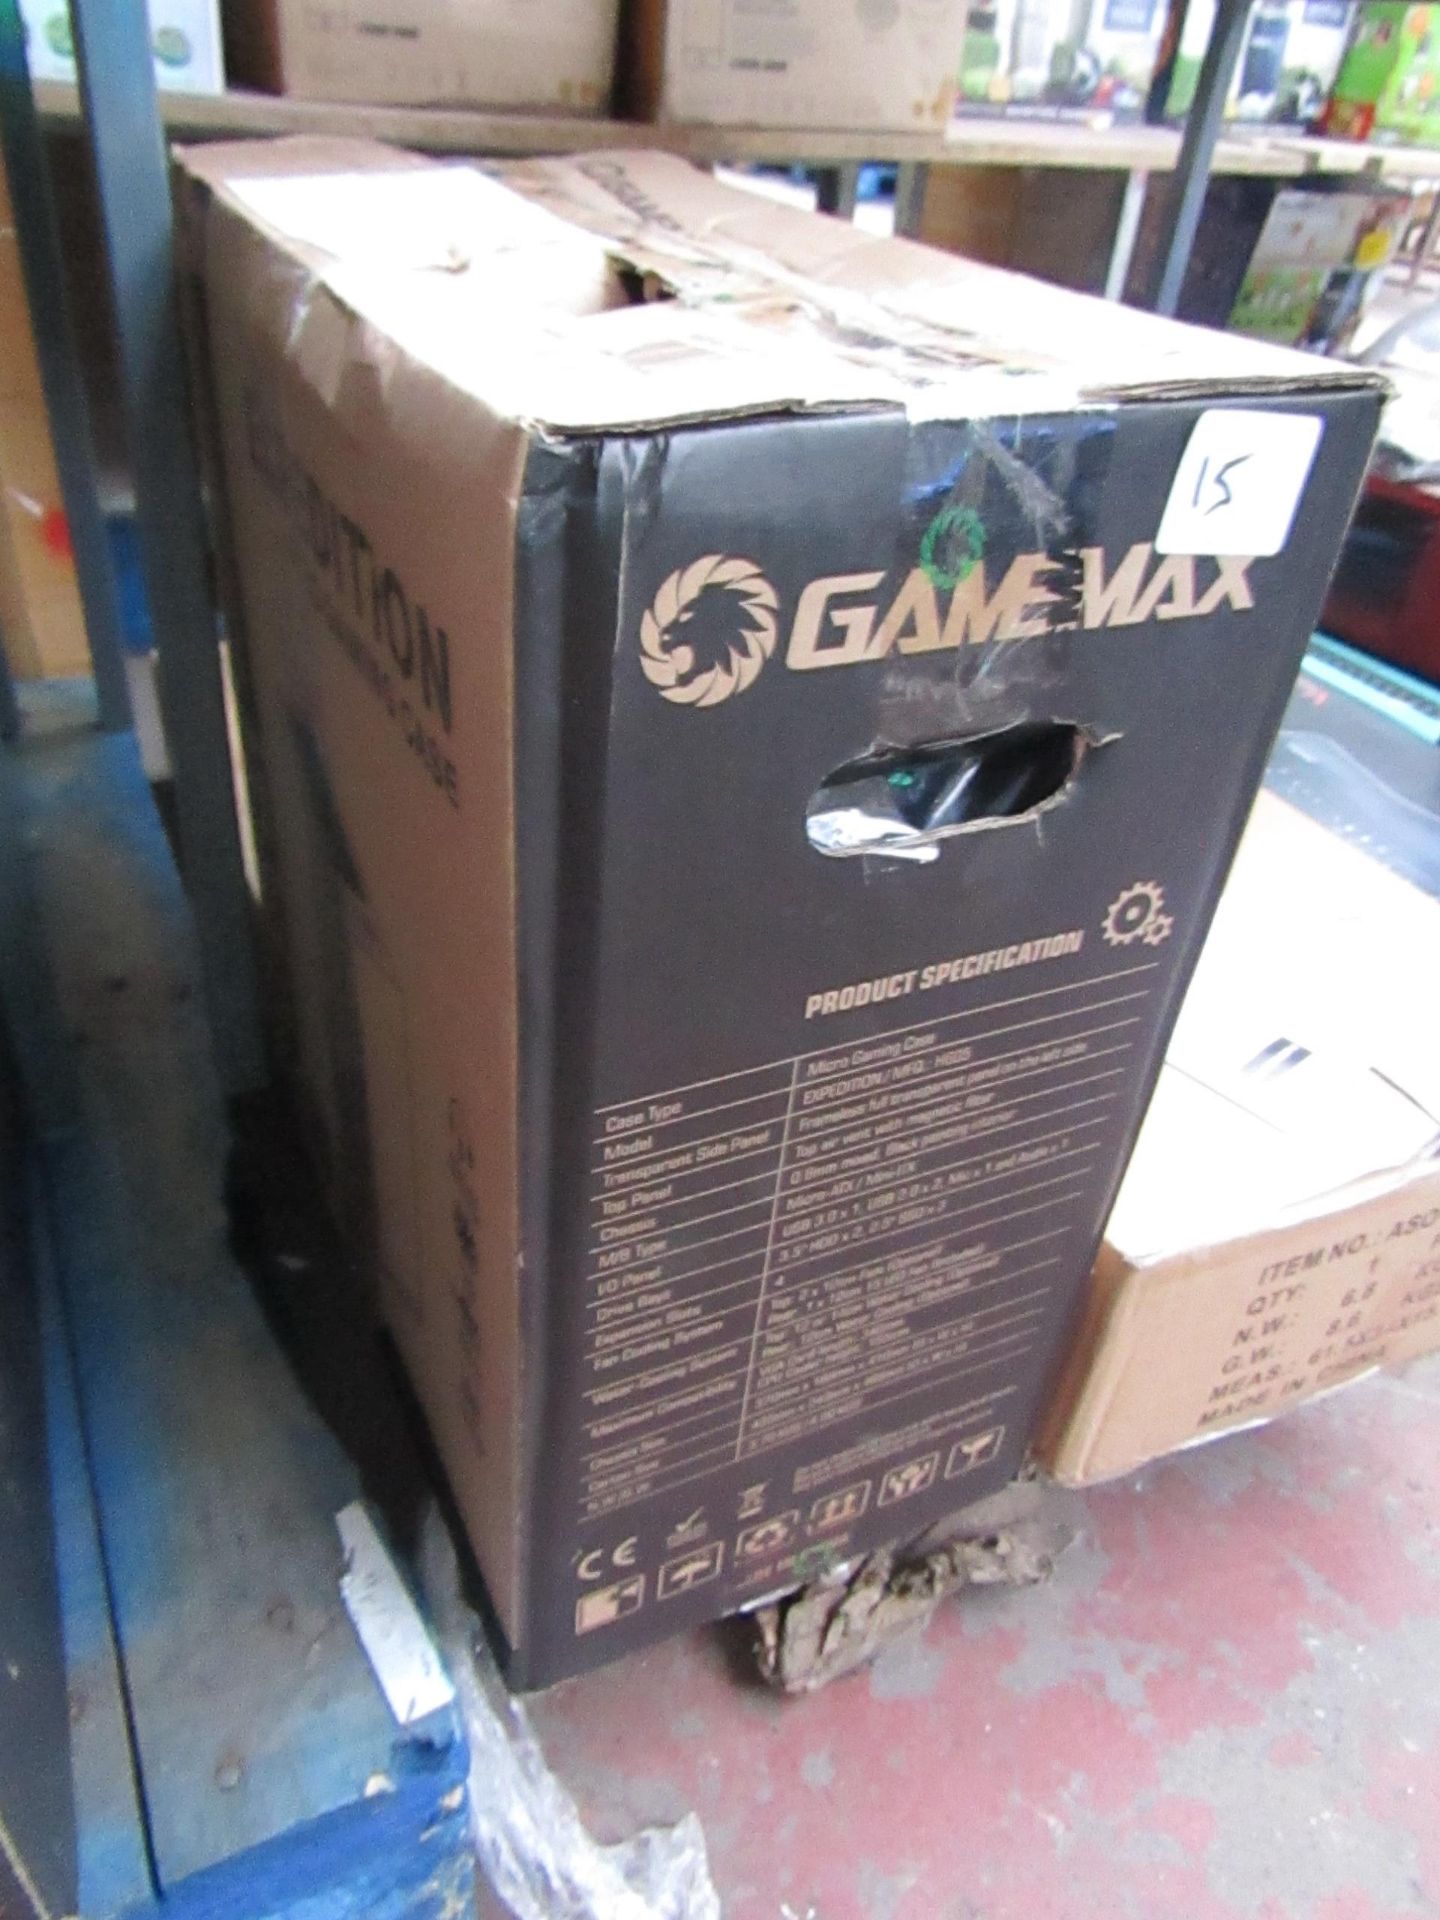 Gamemax Expedition Micro gaming case, boxed and unchecked